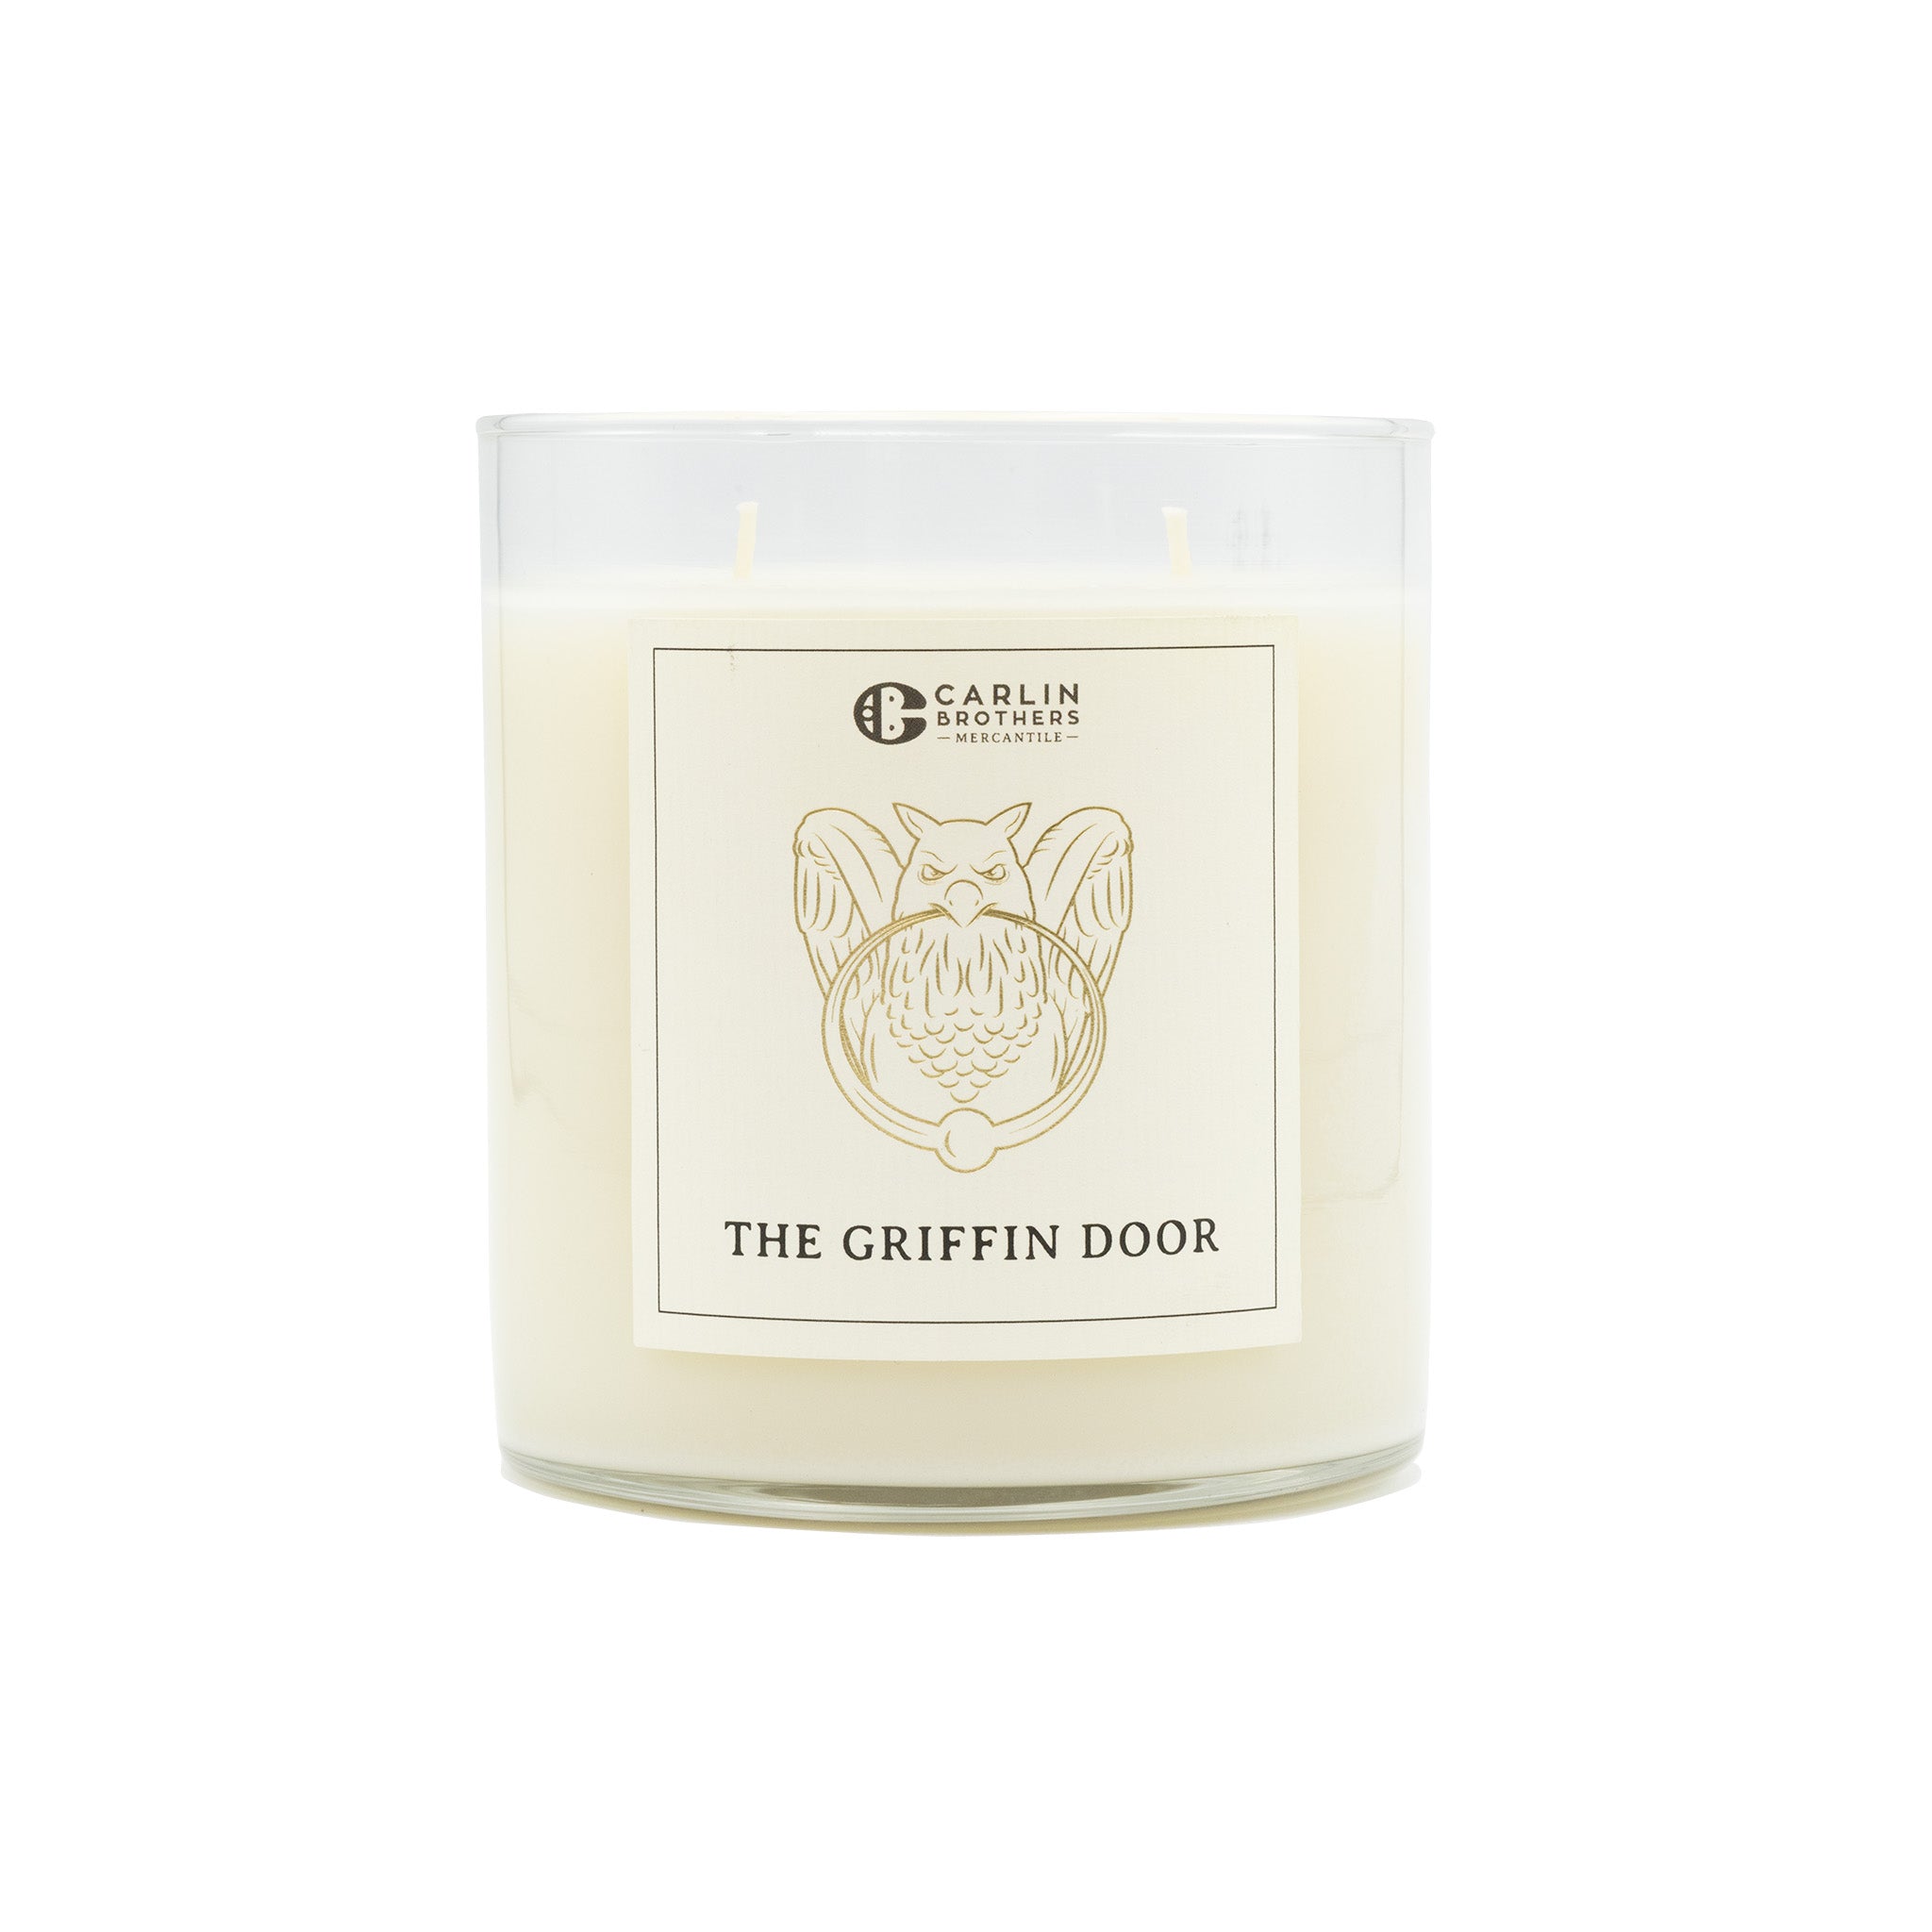 Super Carlin Brothers Mercantile Wizarding club candle